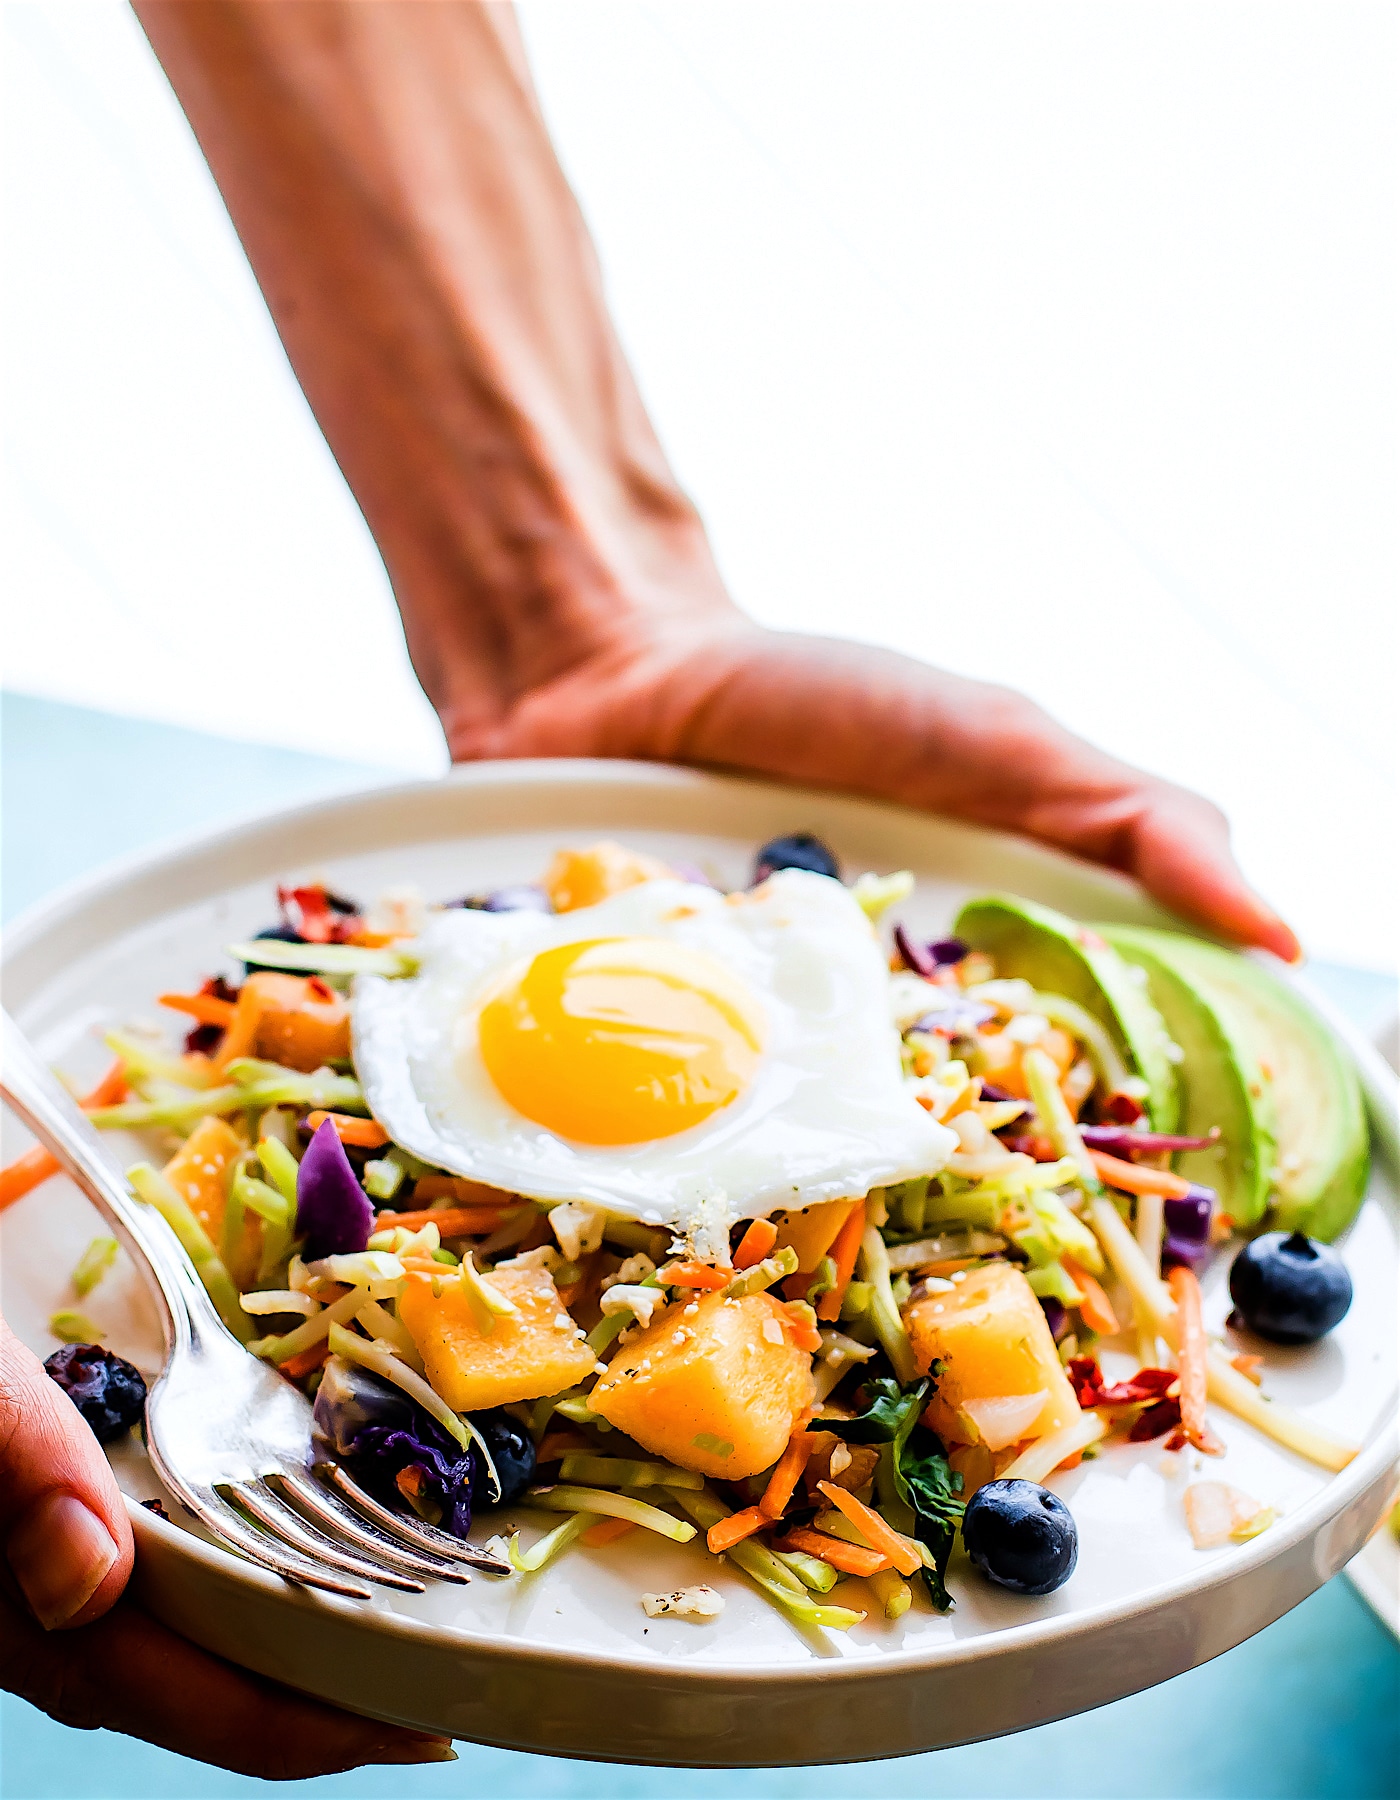 Breakfast salad to start the day! A nourishing warm Paleo meal with broccoli slaw, squash, berries, and fried eggs. A breakfast salad worth waking up for! #whole30